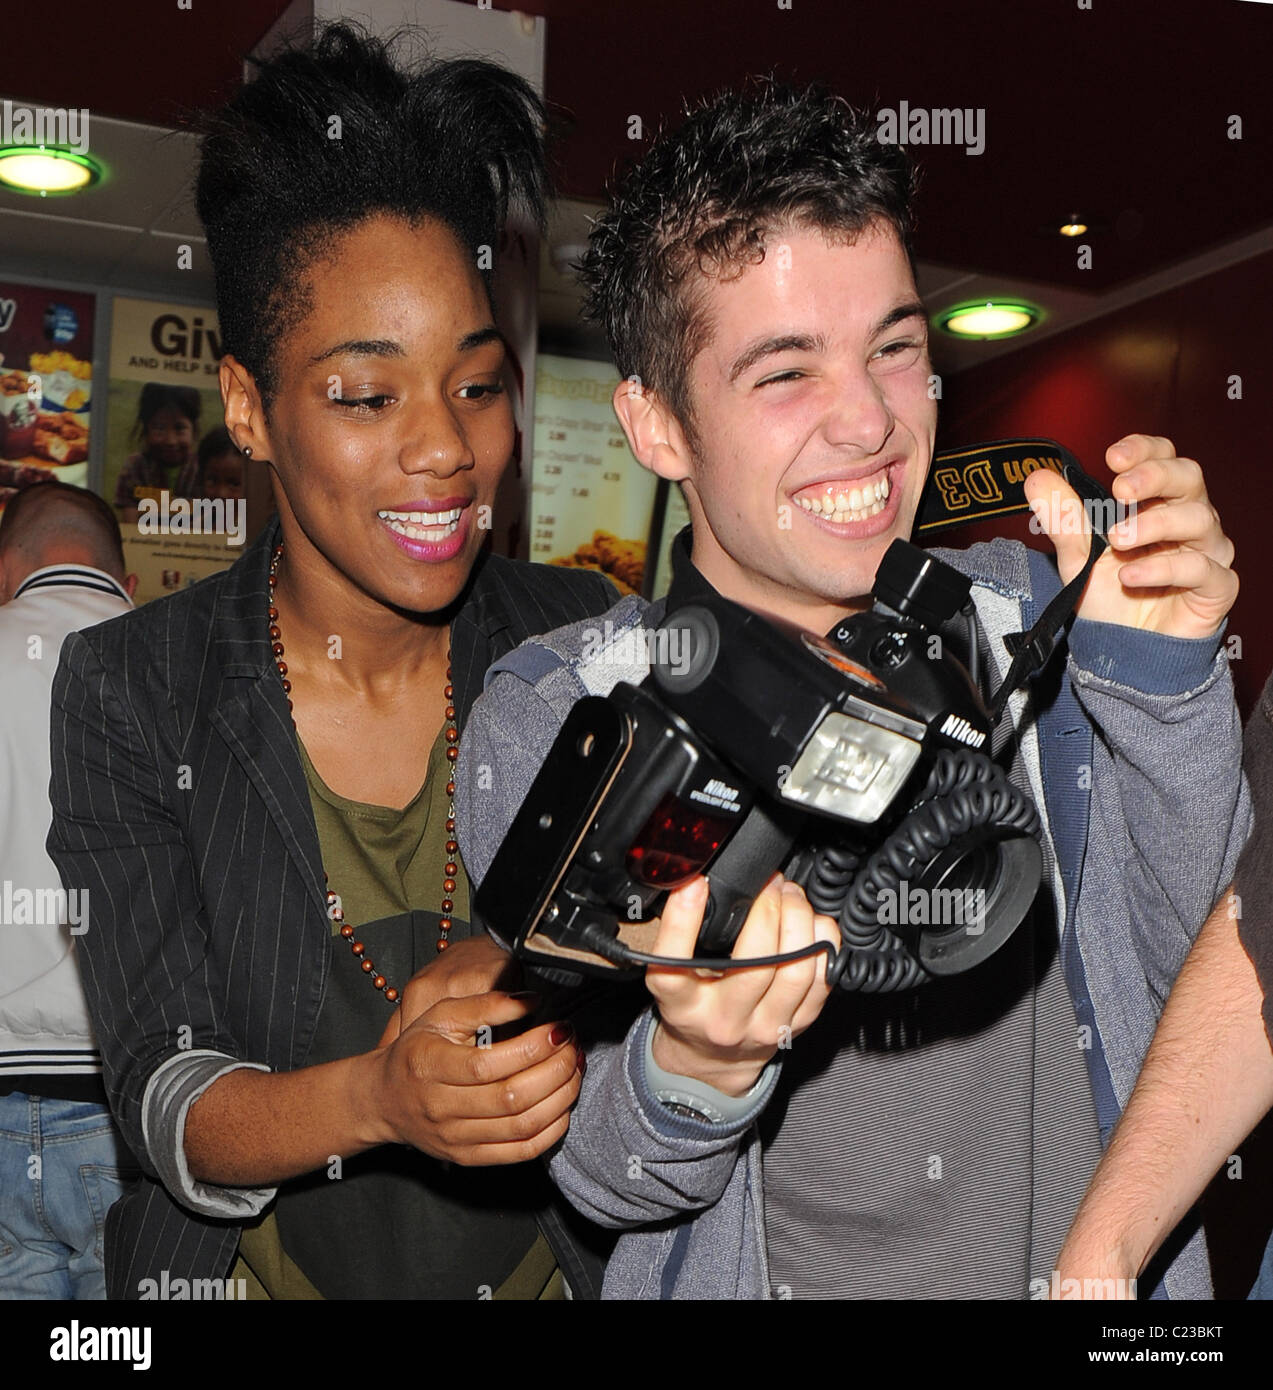 X Factor finalists Rachel Adedji and Jospeh McElderry out and about near The X Factor House. The pair enjoyed a visit to Stock Photo